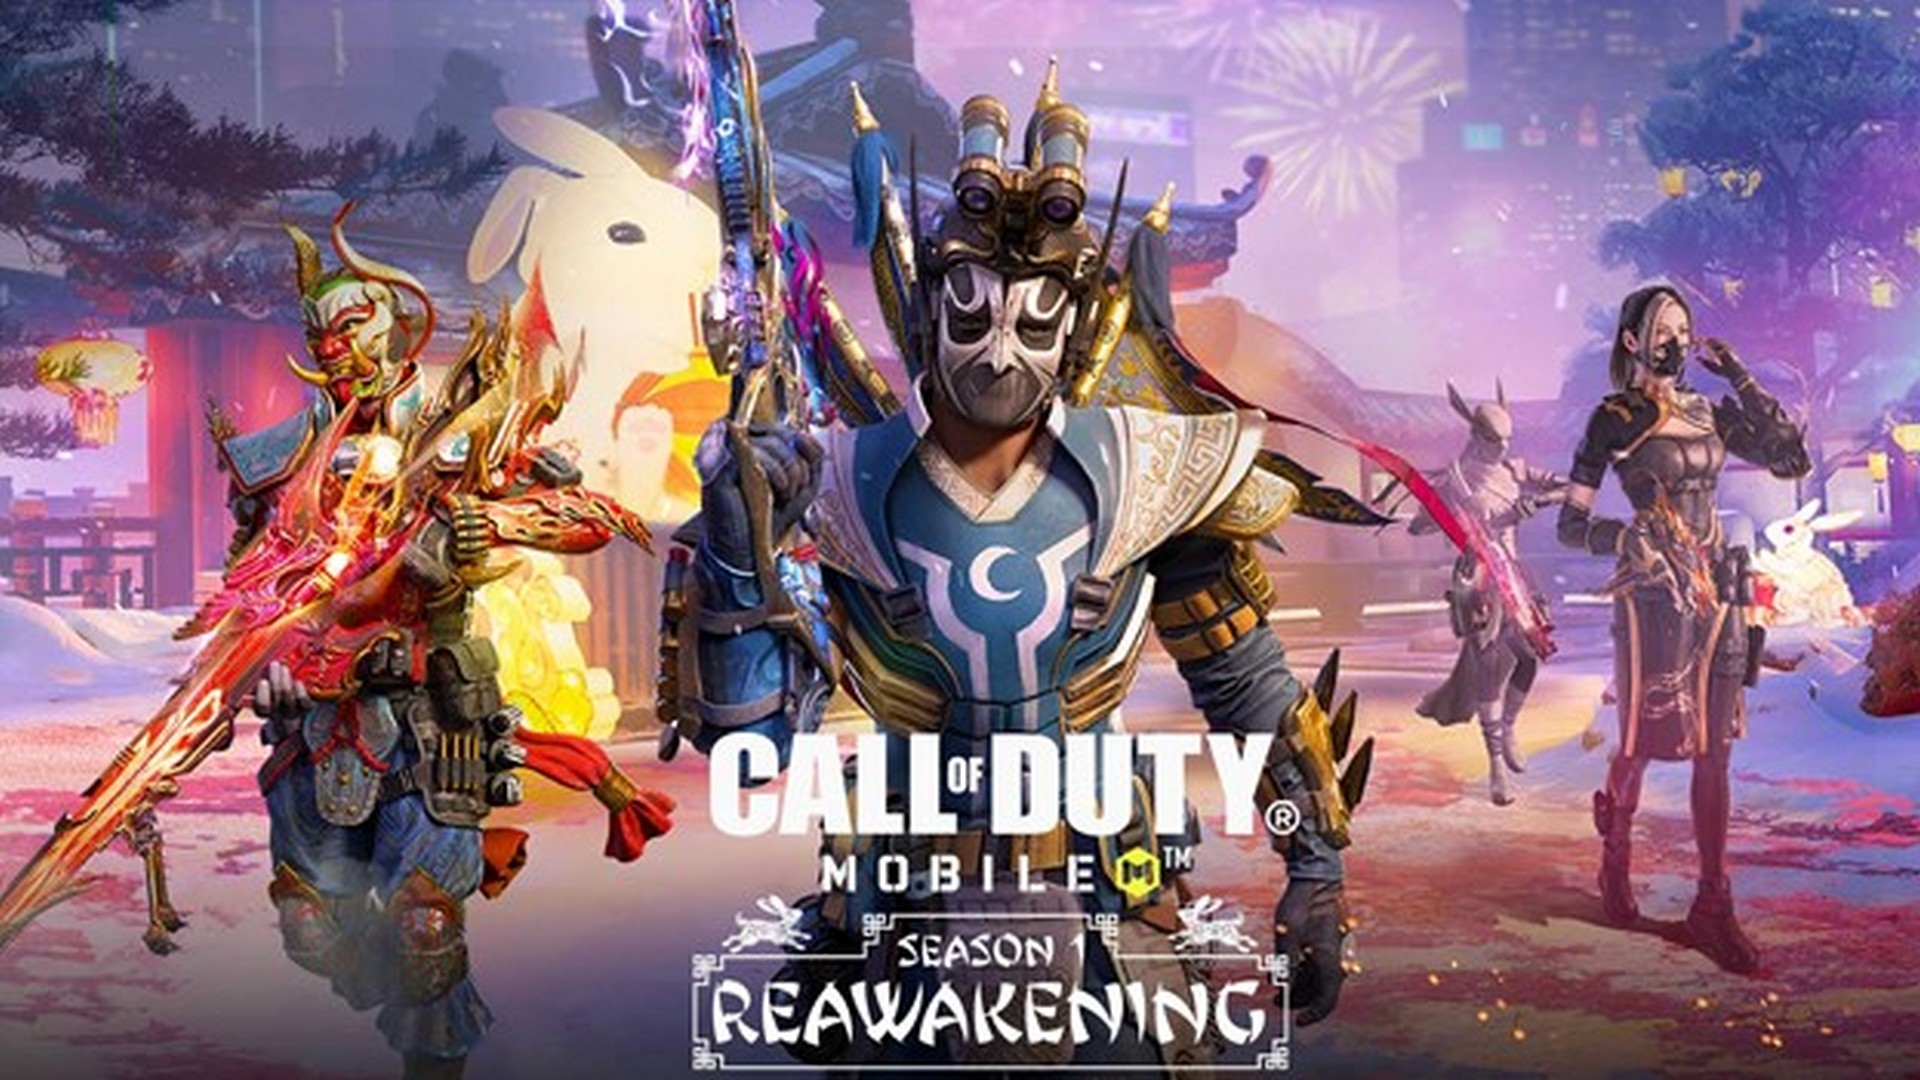 Celebrate The New Year With Call of Duty: Mobile – Season 1: Reawakening – Beginning 19 January